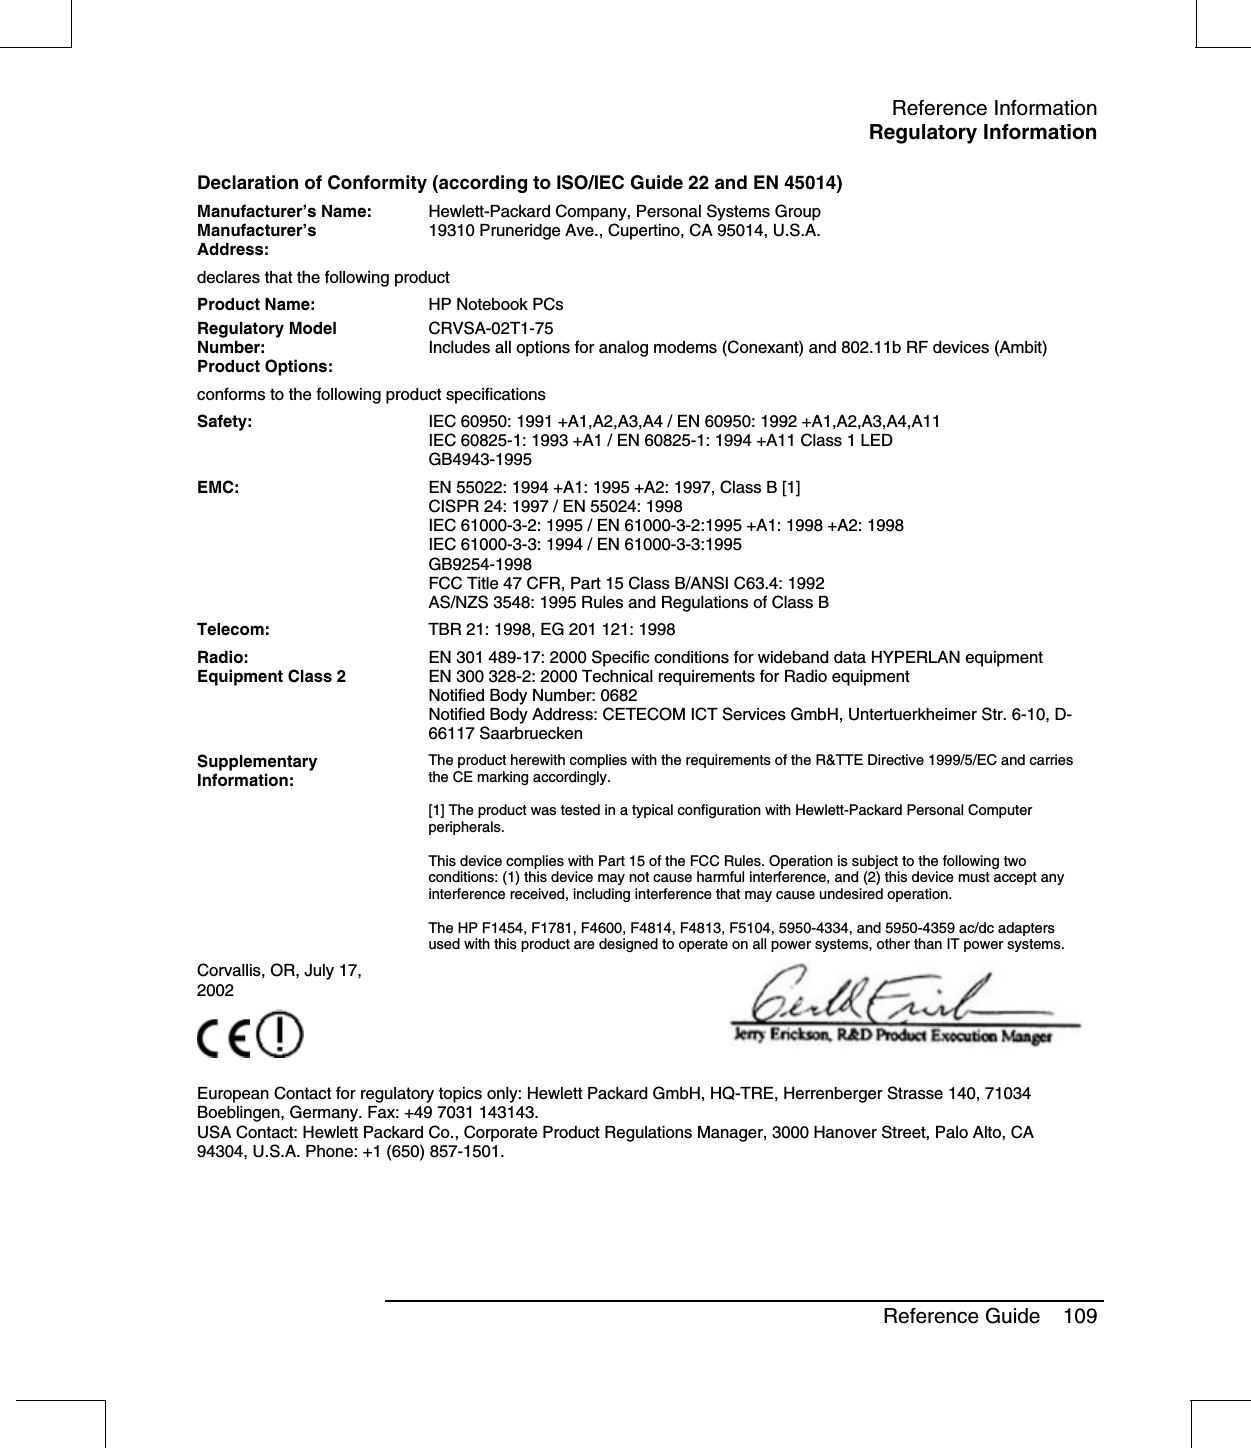 Reference InformationRegulatory InformationReference Guide 109Declaration of Conformity (according to ISO/IEC Guide 22 and EN 45014)Manufacturer’s Name:Manufacturer’sAddress:Hewlett-Packard Company, Personal Systems Group19310 Pruneridge Ave., Cupertino, CA 95014, U.S.A.declares that the following productProduct Name: HP Notebook PCsRegulatory ModelNumber:Product Options:CRVSA-02T1-75Includes all options for analog modems (Conexant) and 802.11b RF devices (Ambit)conforms to the following product specificationsSafety: IEC 60950: 1991 +A1,A2,A3,A4 / EN 60950: 1992 +A1,A2,A3,A4,A11IEC 60825-1: 1993 +A1 / EN 60825-1: 1994 +A11 Class 1 LEDGB4943-1995EMC: EN 55022: 1994 +A1: 1995 +A2: 1997, Class B [1]CISPR 24: 1997 / EN 55024: 1998IEC 61000-3-2: 1995 / EN 61000-3-2:1995 +A1: 1998 +A2: 1998IEC 61000-3-3: 1994 / EN 61000-3-3:1995GB9254-1998FCC Title 47 CFR, Part 15 Class B/ANSI C63.4: 1992AS/NZS 3548: 1995 Rules and Regulations of Class BTelecom: TBR 21: 1998, EG 201 121: 1998Radio:Equipment Class 2EN 301 489-17: 2000 Specific conditions for wideband data HYPERLAN equipmentEN 300 328-2: 2000 Technical requirements for Radio equipmentNotified Body Number: 0682Notified Body Address: CETECOM ICT Services GmbH, Untertuerkheimer Str. 6-10, D-66117 SaarbrueckenSupplementaryInformation:The product herewith complies with the requirements of the R&amp;TTE Directive 1999/5/EC and carriesthe CE marking accordingly.[1] The product was tested in a typical configuration with Hewlett-Packard Personal Computerperipherals.This device complies with Part 15 of the FCC Rules. Operation is subject to the following twoconditions: (1) this device may not cause harmful interference, and (2) this device must accept anyinterference received, including interference that may cause undesired operation.The HP F1454, F1781, F4600, F4814, F4813, F5104, 5950-4334, and 5950-4359 ac/dc adaptersused with this product are designed to operate on all power systems, other than IT power systems.Corvallis, OR, July 17,2002European Contact for regulatory topics only: Hewlett Packard GmbH, HQ-TRE, Herrenberger Strasse 140, 71034Boeblingen, Germany. Fax: +49 7031 143143.USA Contact: Hewlett Packard Co., Corporate Product Regulations Manager, 3000 Hanover Street, Palo Alto, CA94304, U.S.A. Phone: +1 (650) 857-1501.